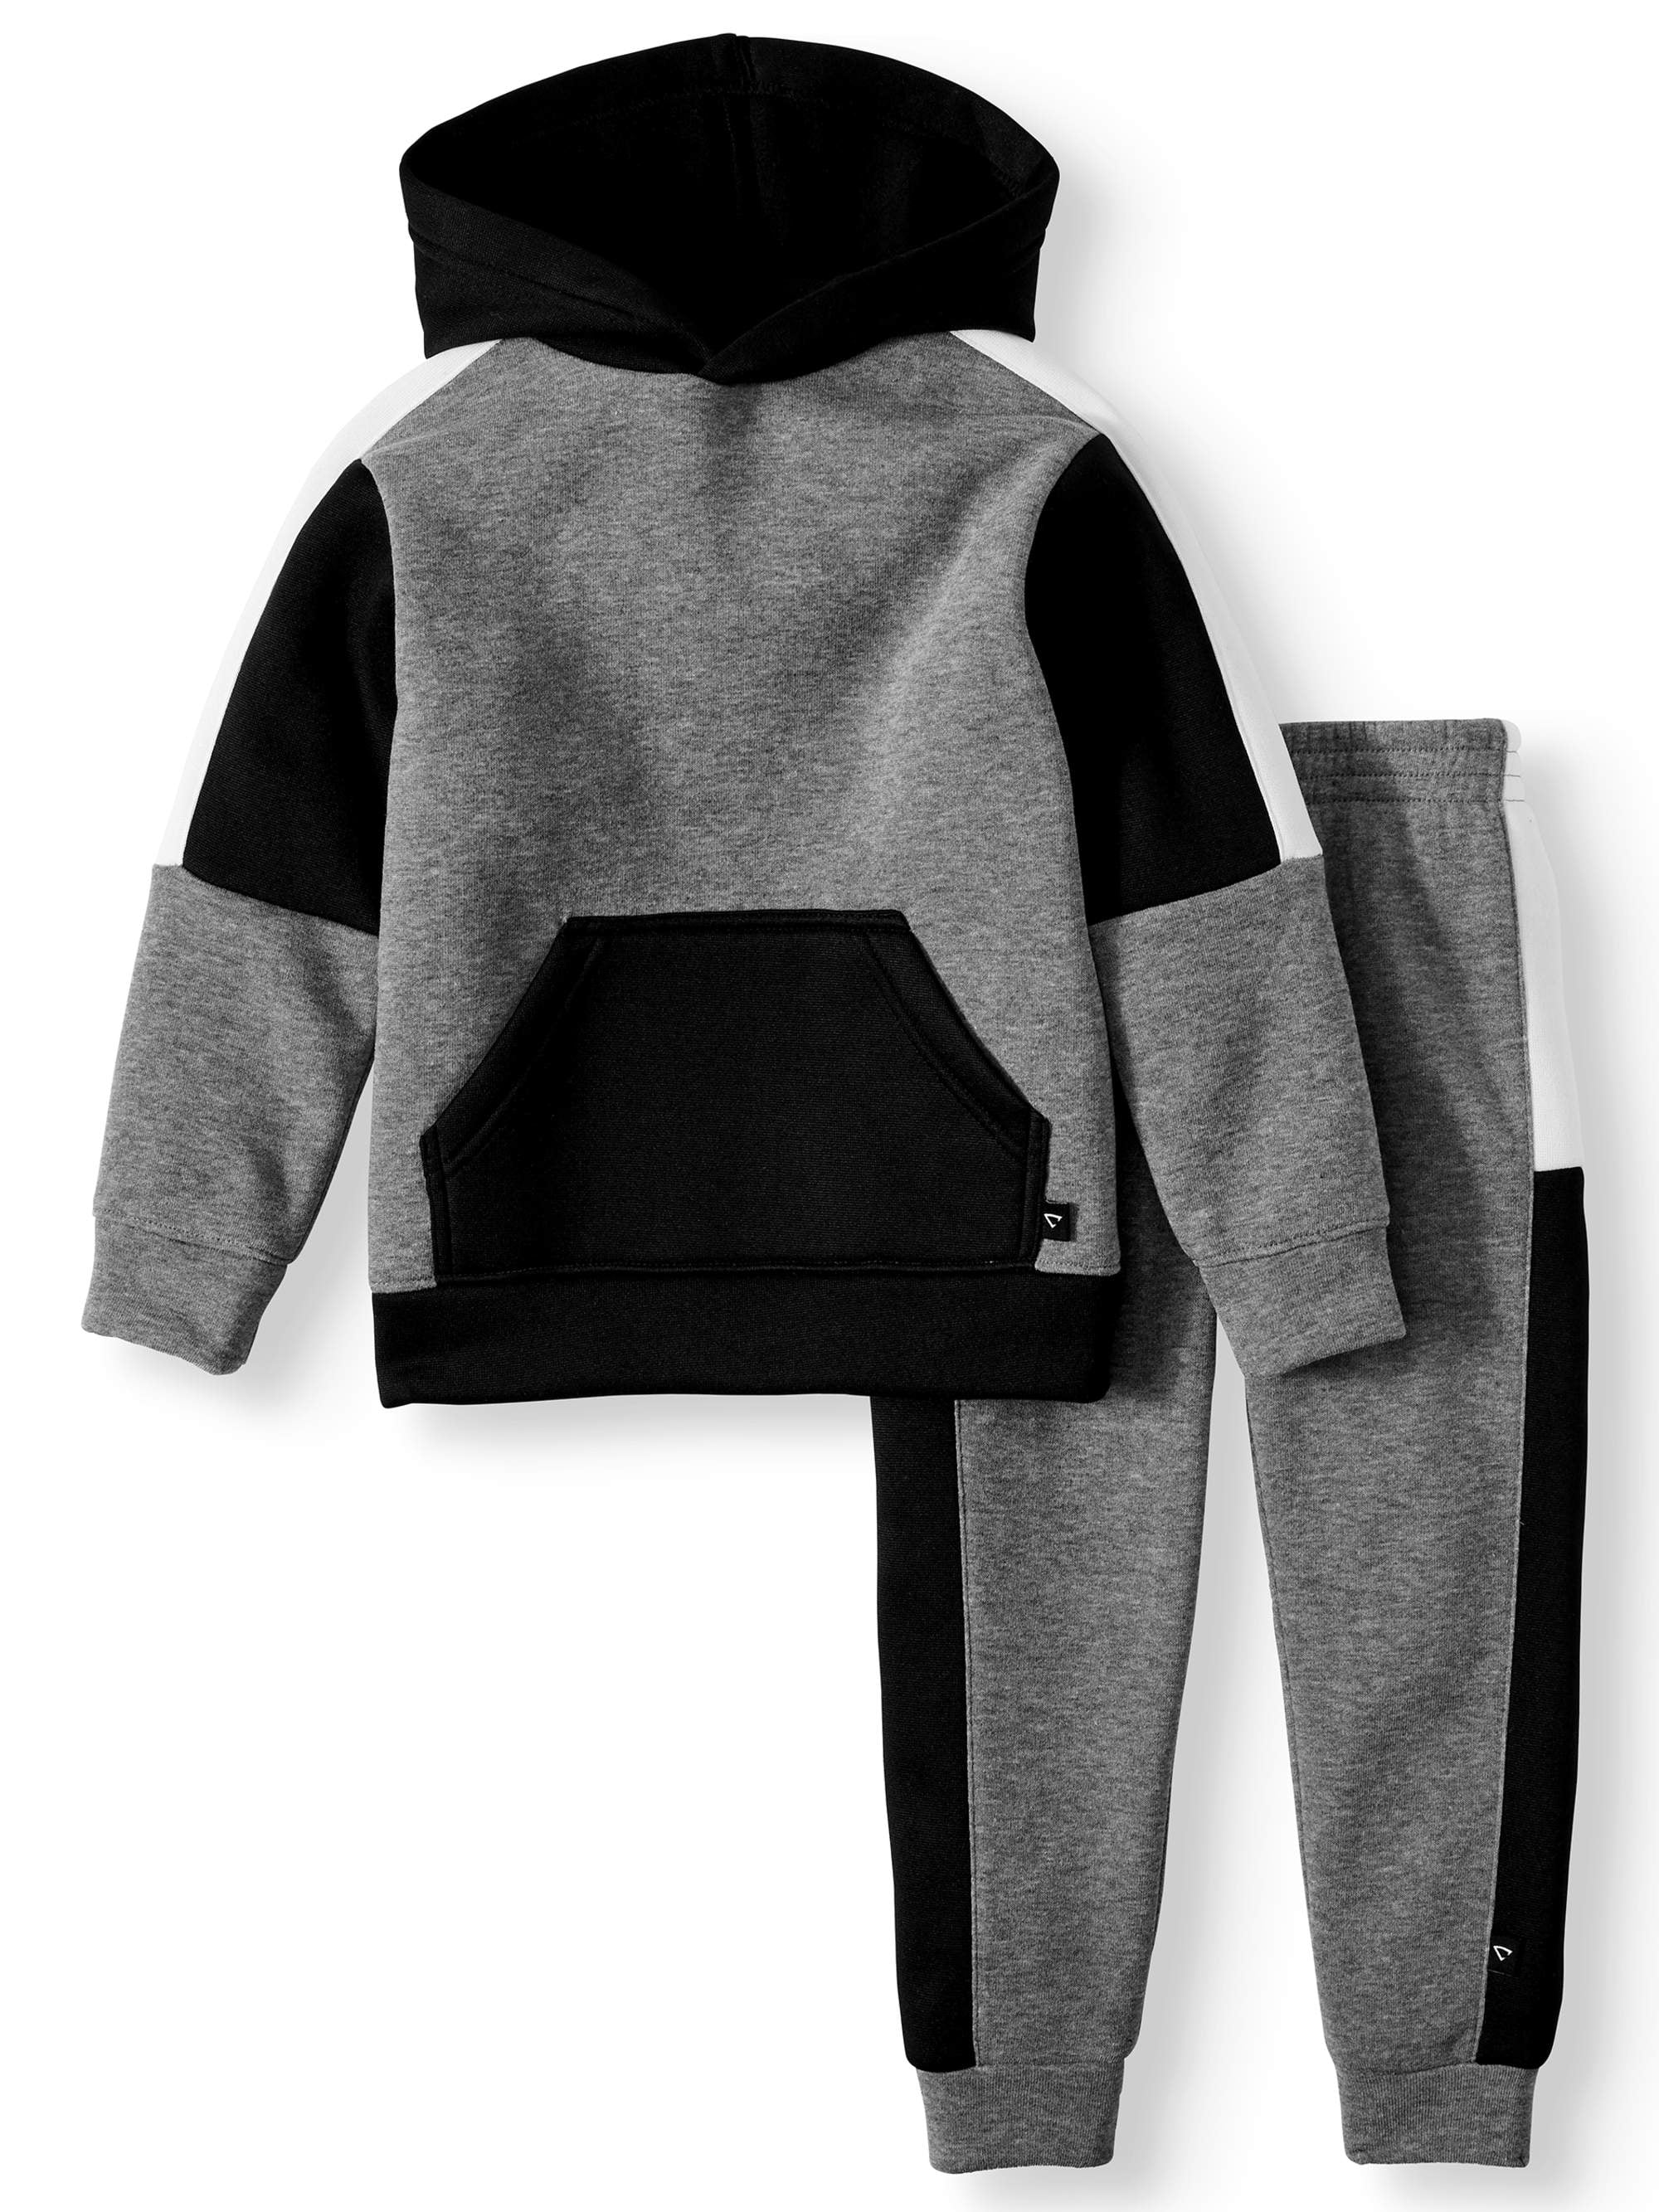 Beverly Hills Polo Club Boys Jogger Set Fleece Pullover Hoodie Sweatshirt and Sweatpants Outfit 